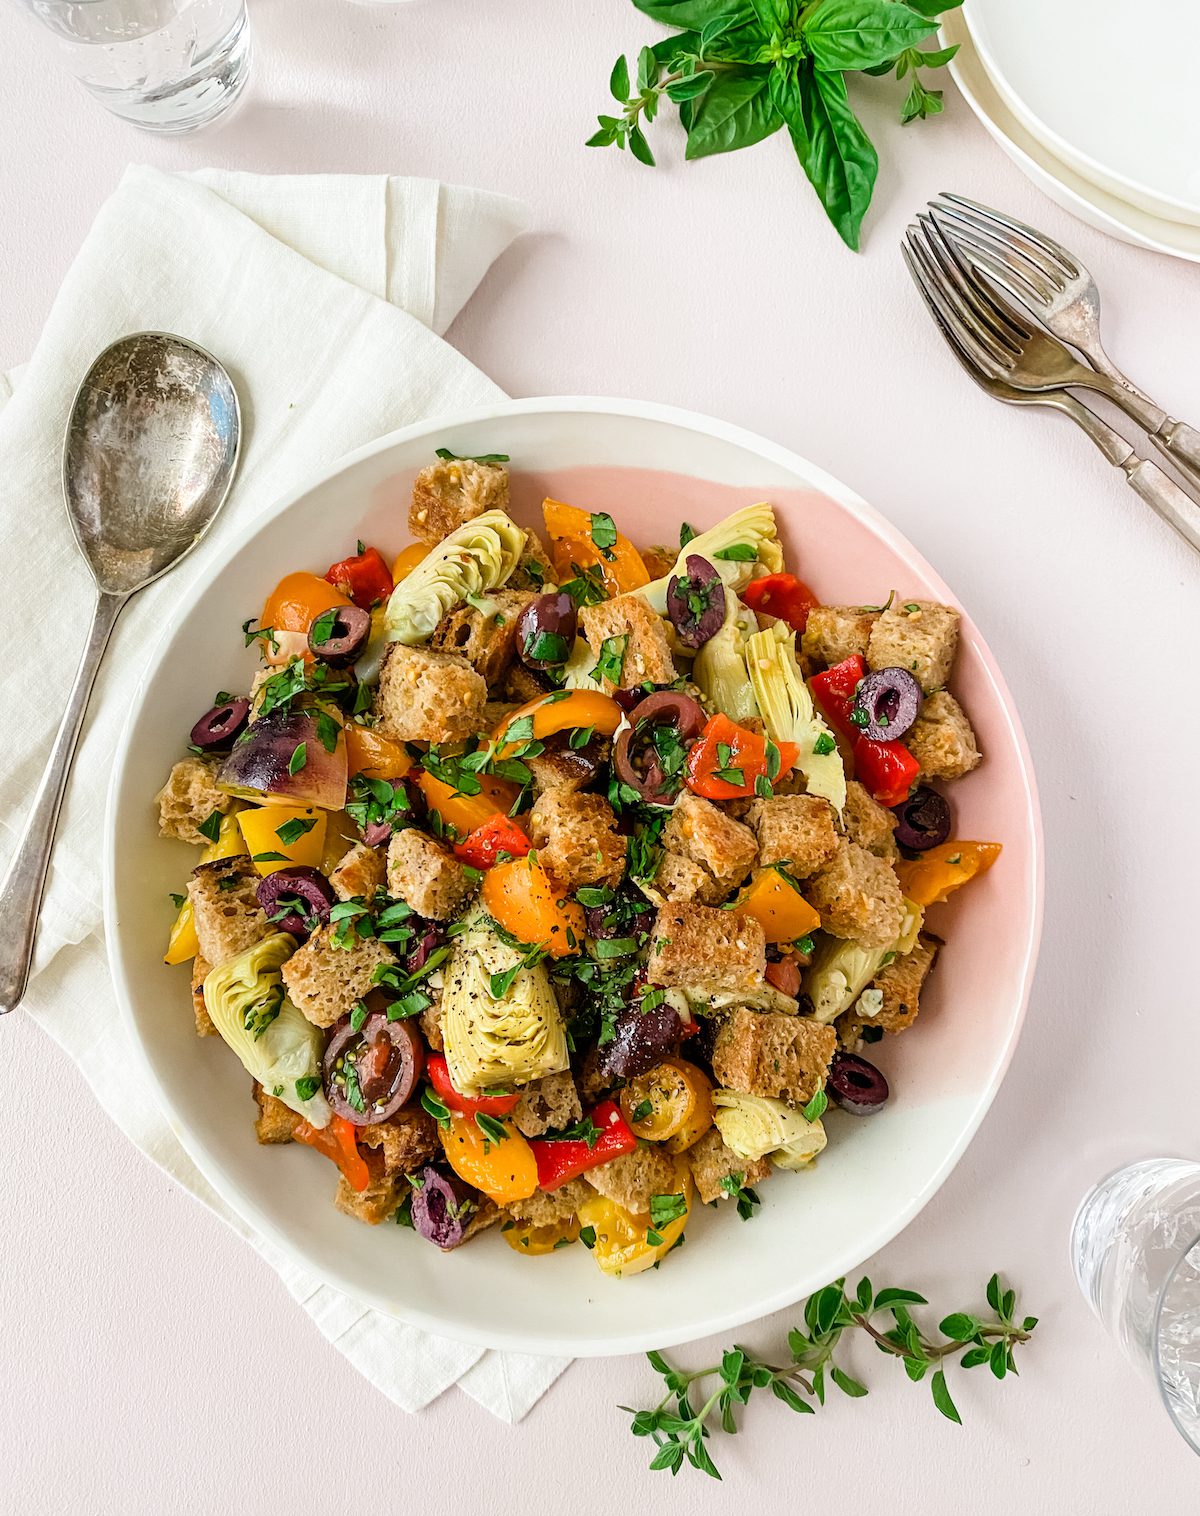 panzanella bread salad with artichokes in a pink bowl with herbs